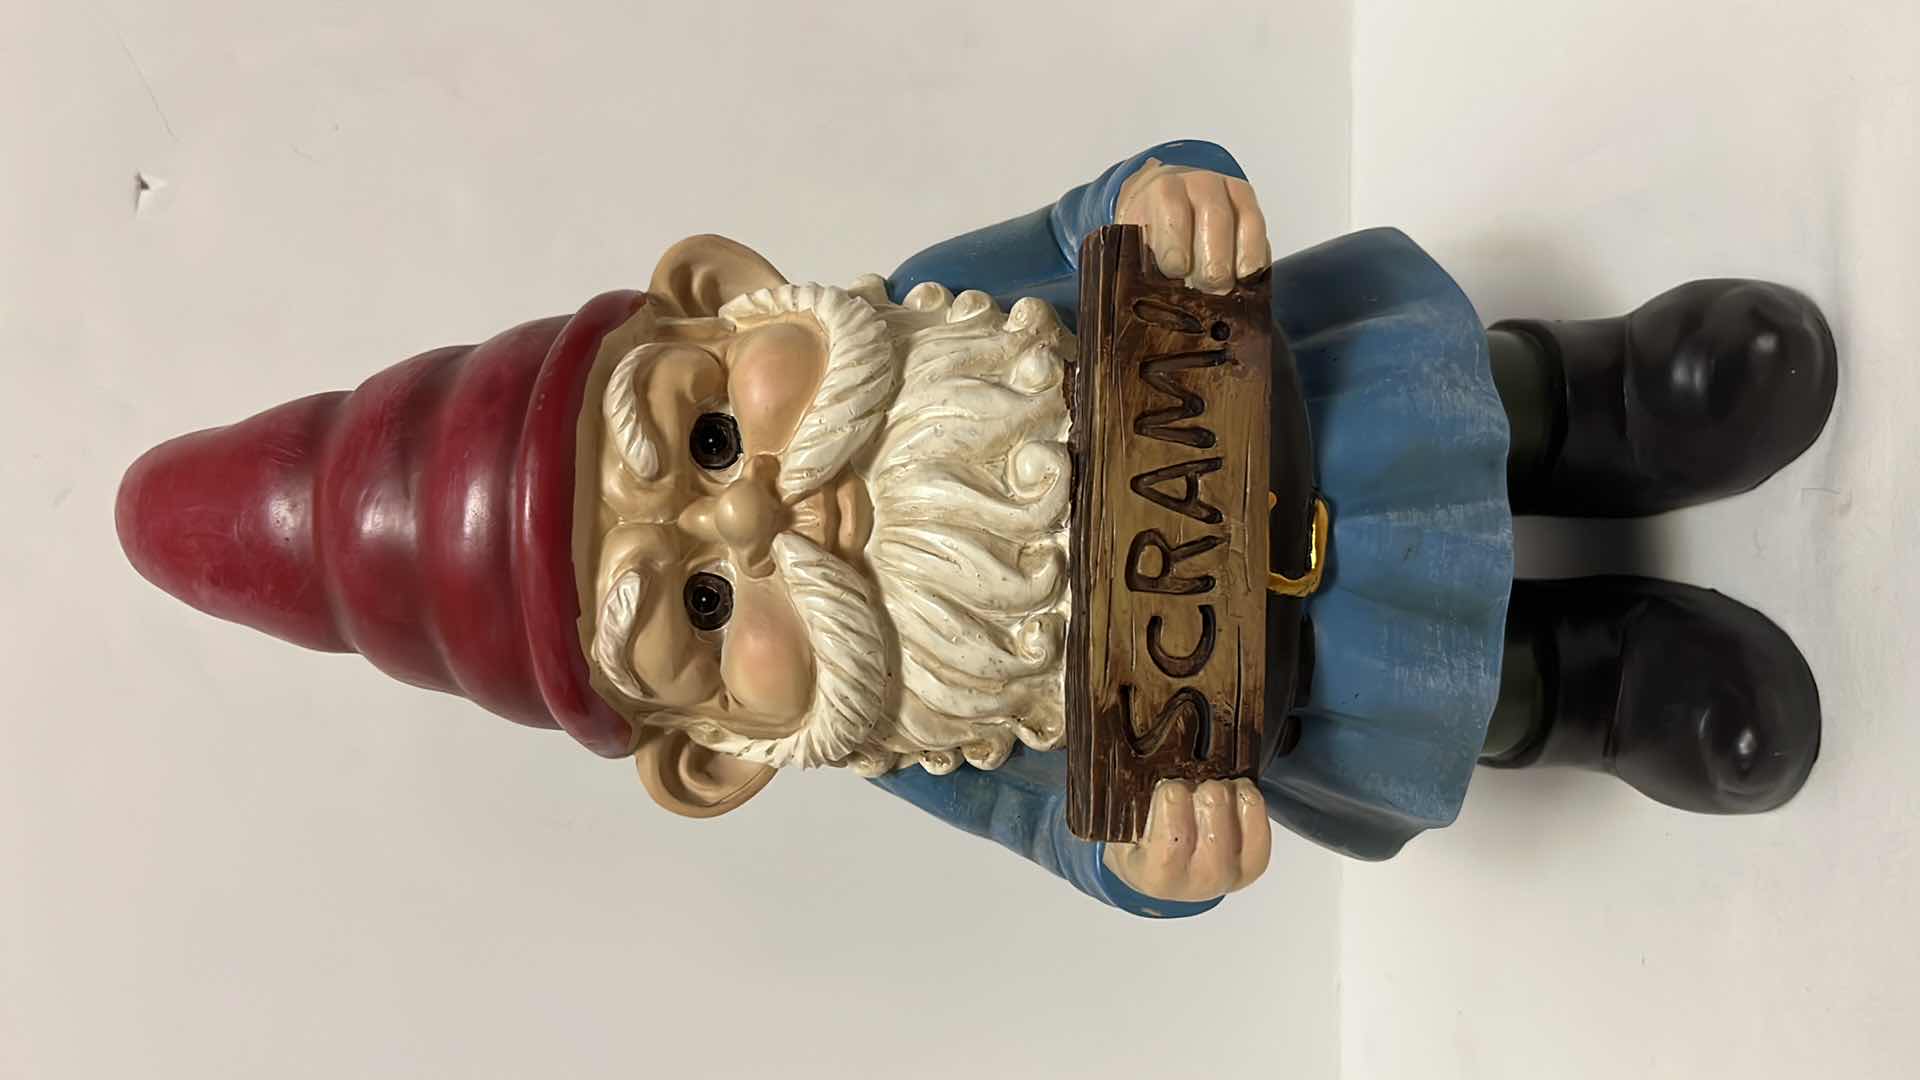 Photo 3 of WELCOME/SCRAM DOUBLE-SIDED RESIN GARDEN GNOME 13.5”